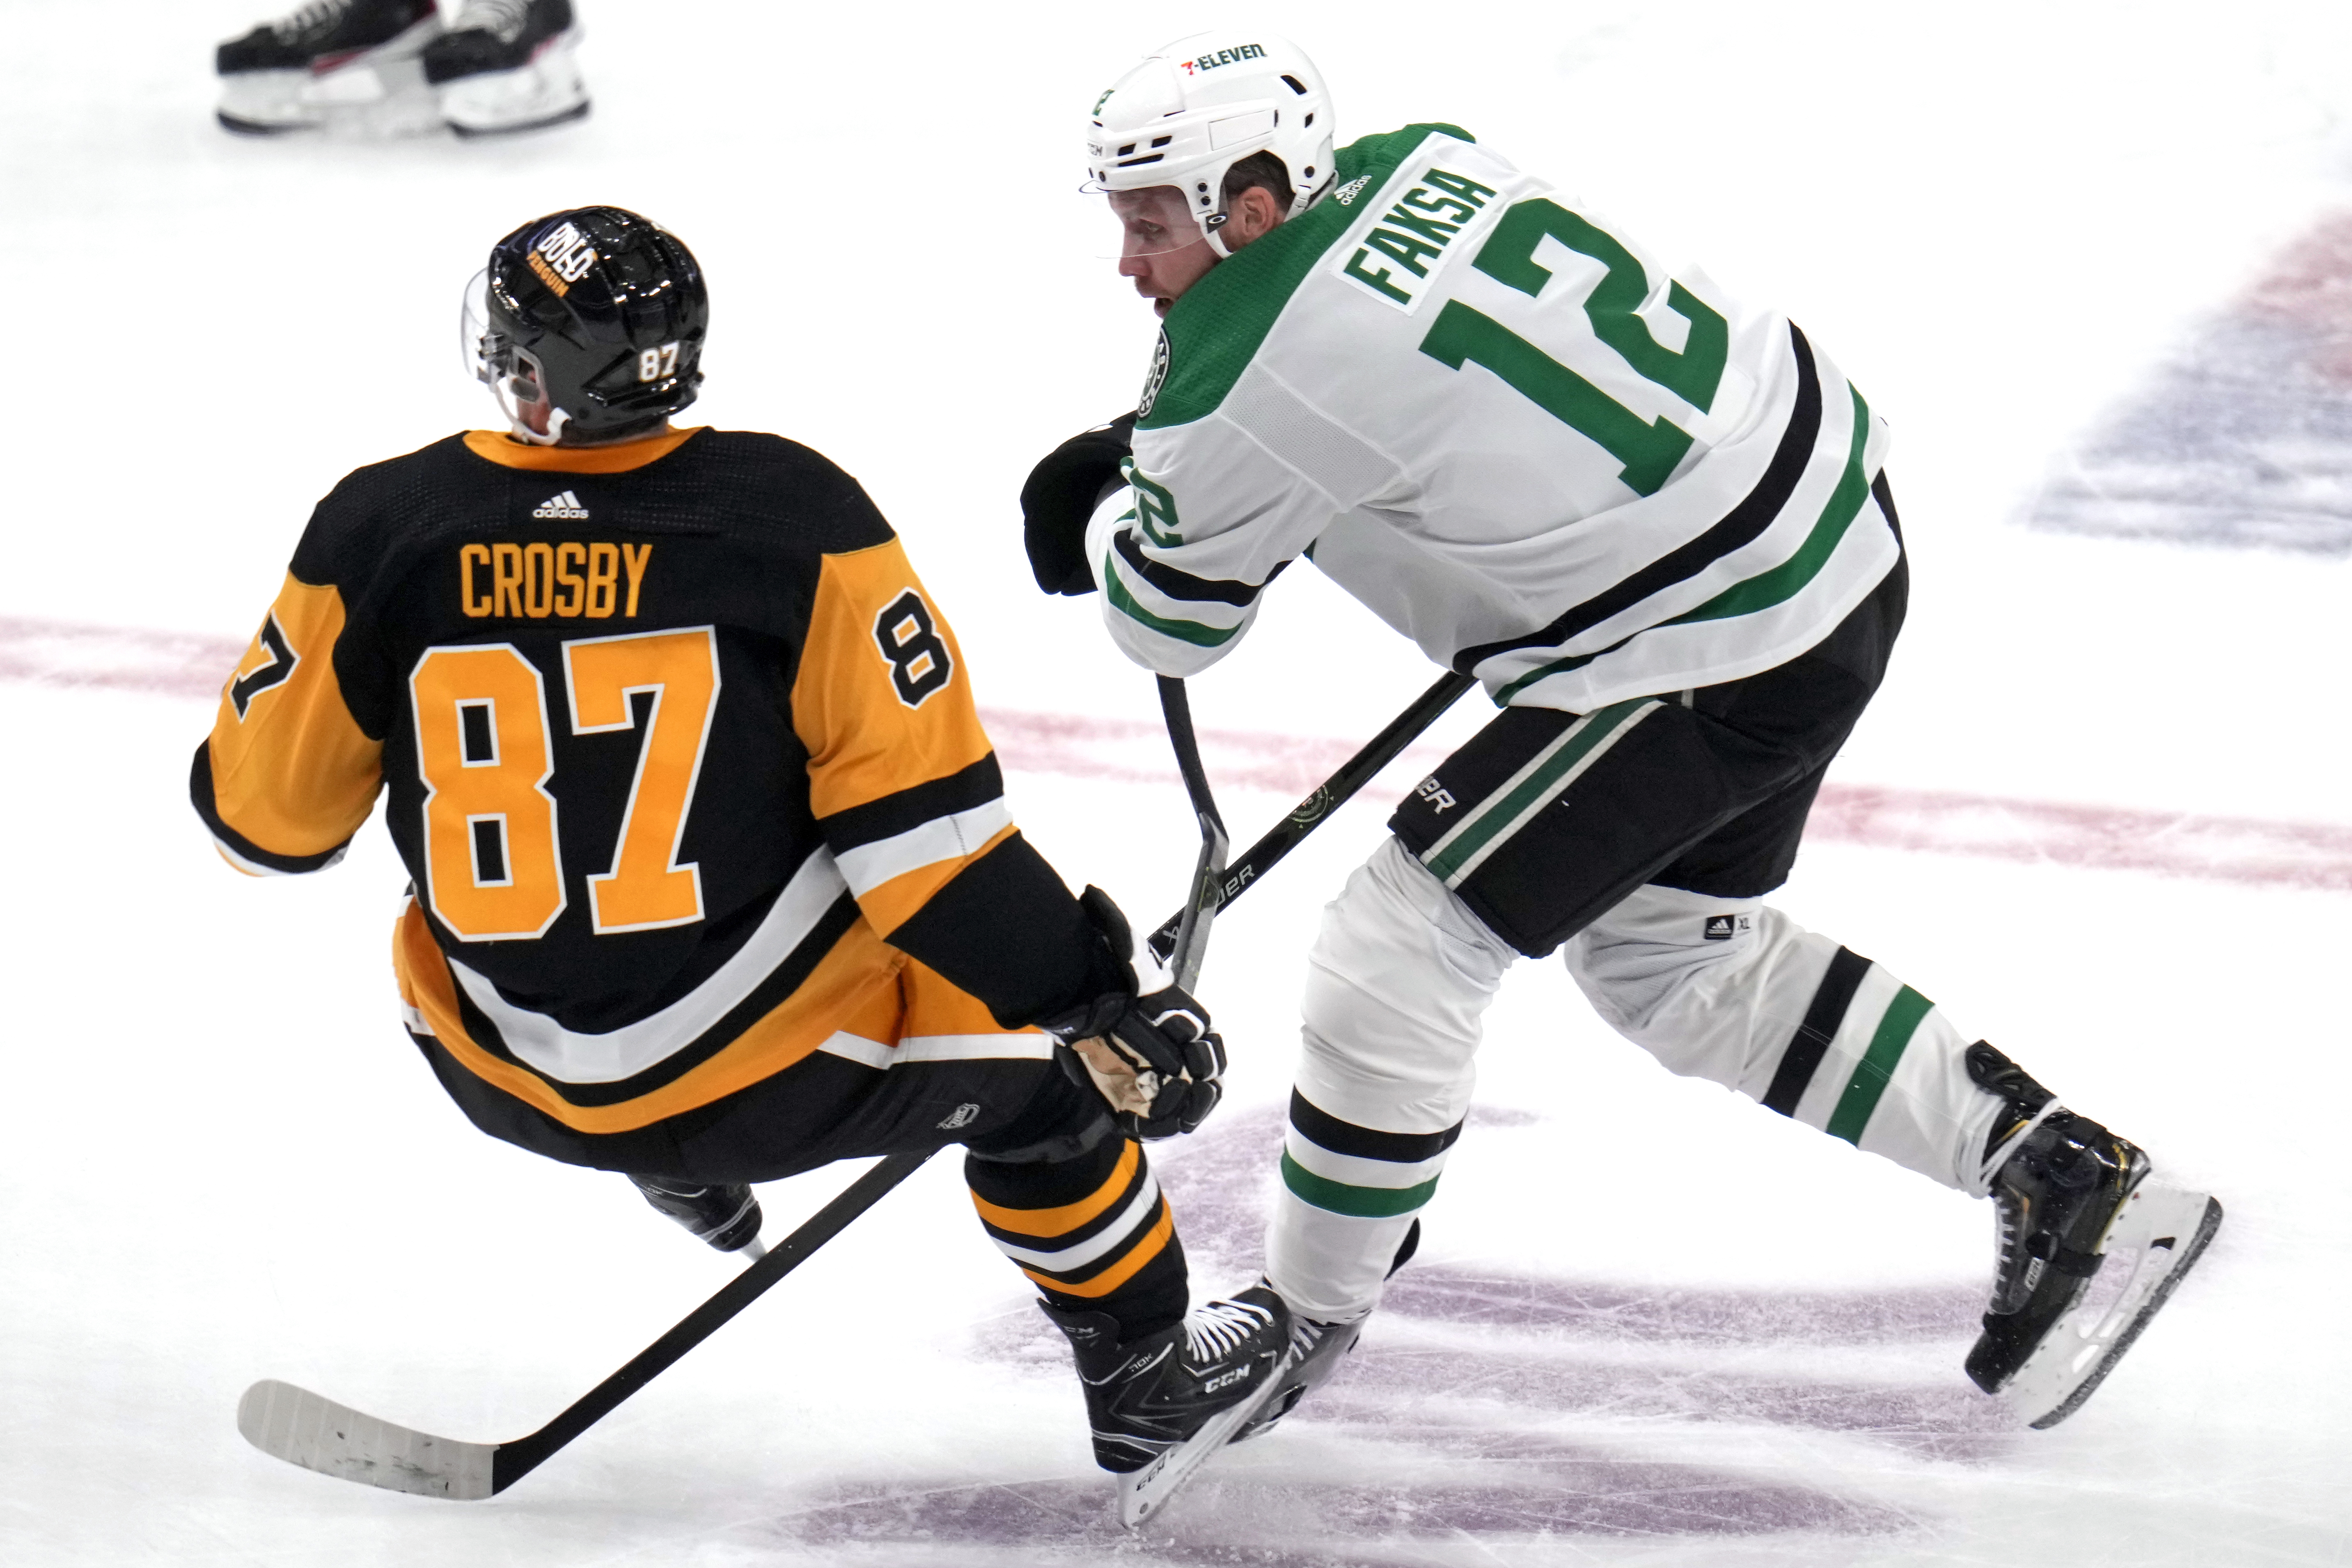 NHL roundup: Stars top Penguins 4-1 with strong third period